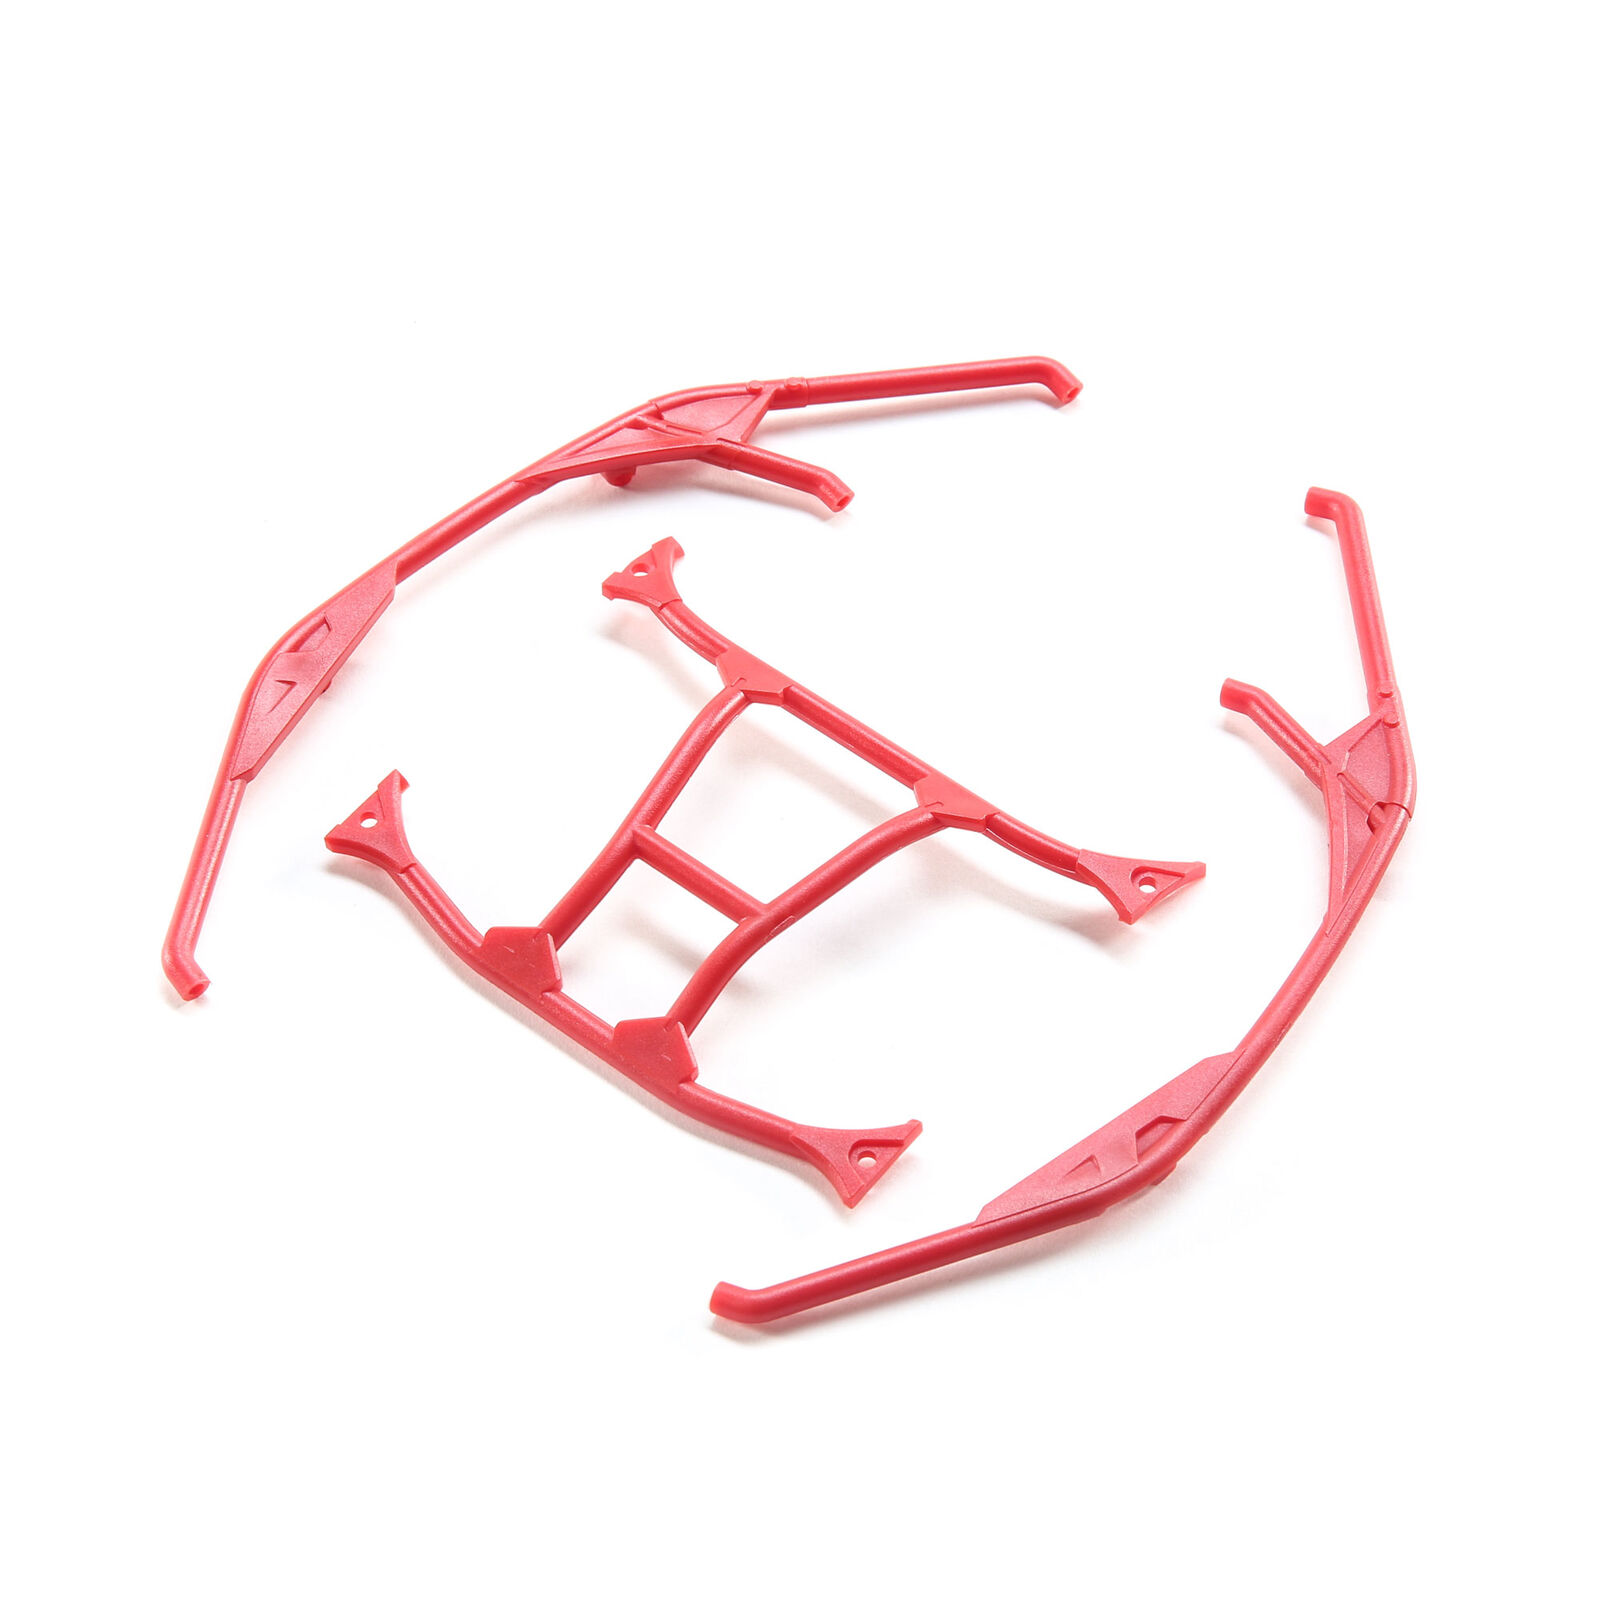 AXIAL Yeti Jr. Can-Am X3 Cage (Red)